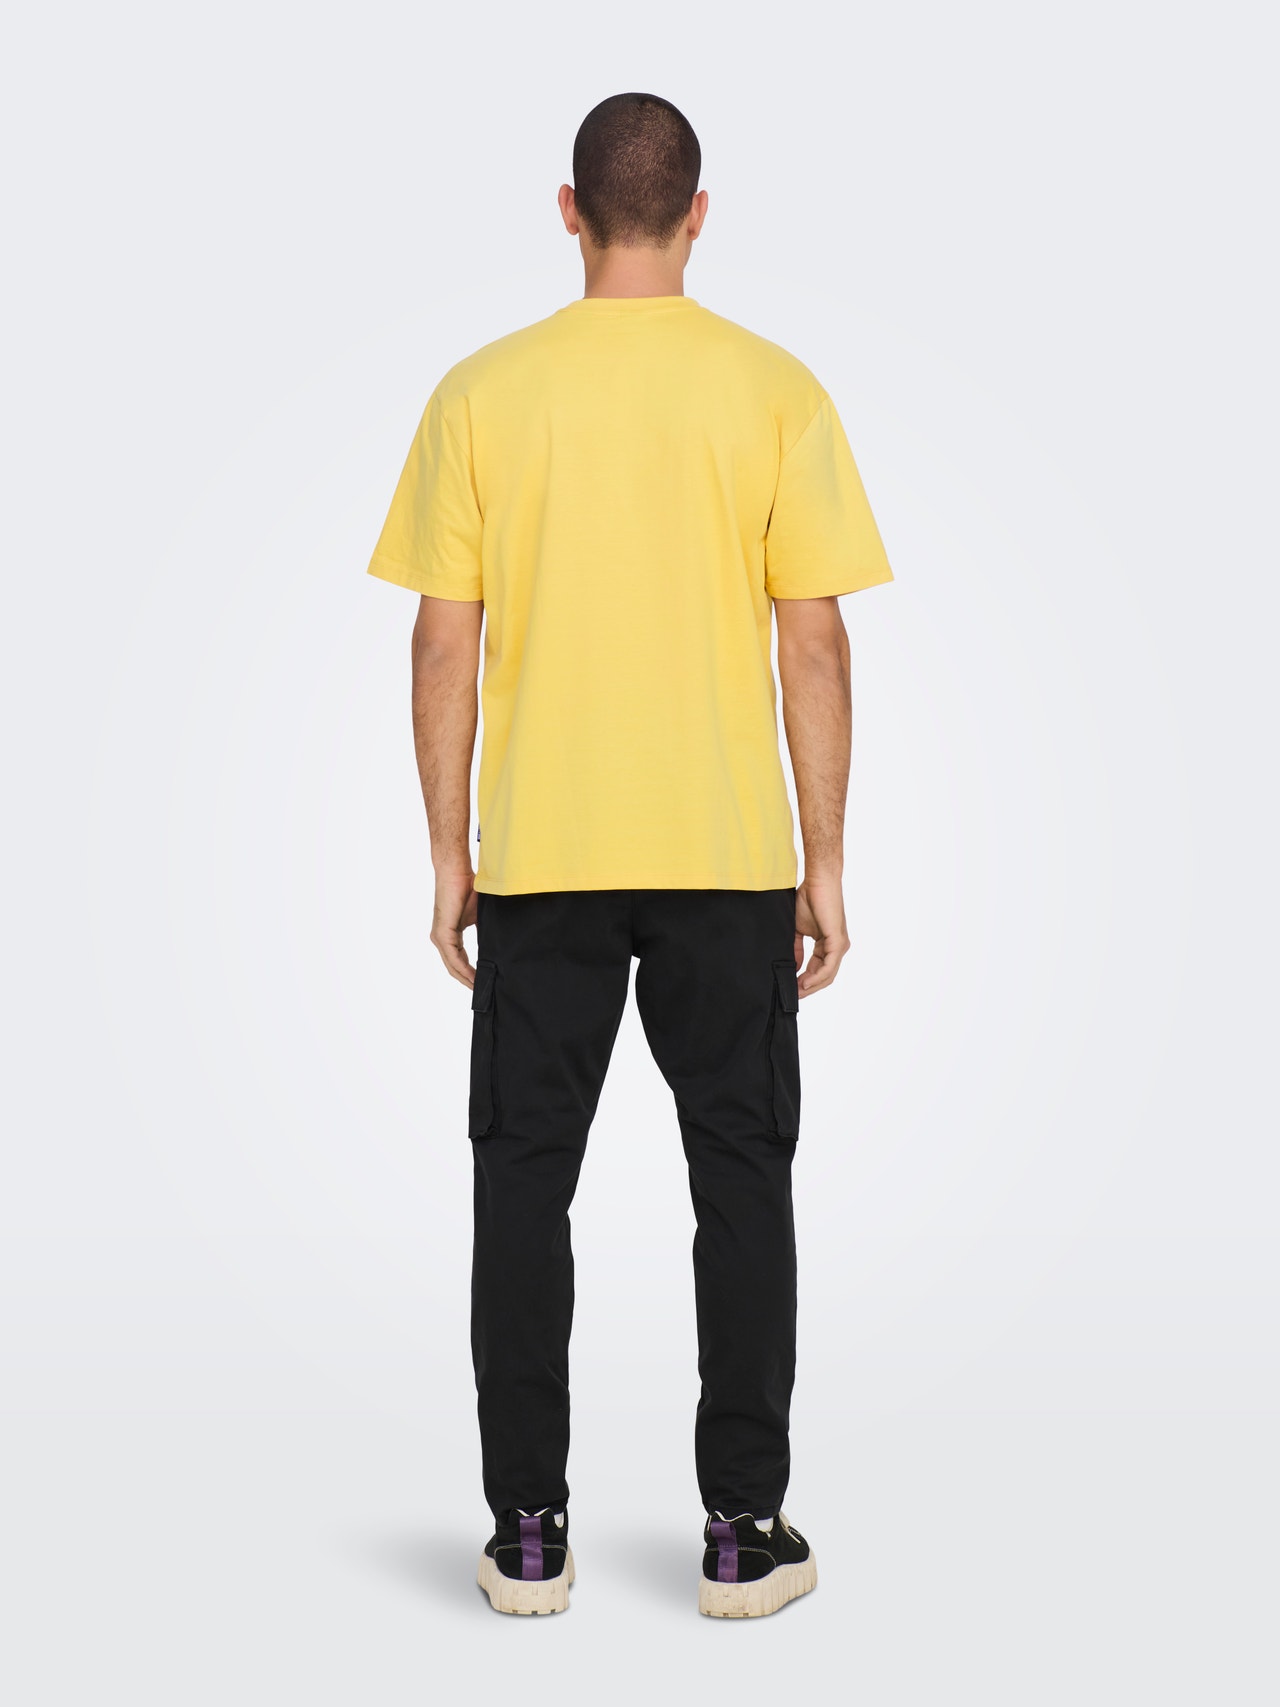 ONLY & SONS Relaxed Fit Round Neck T-Shirt -Ochre - 22022532